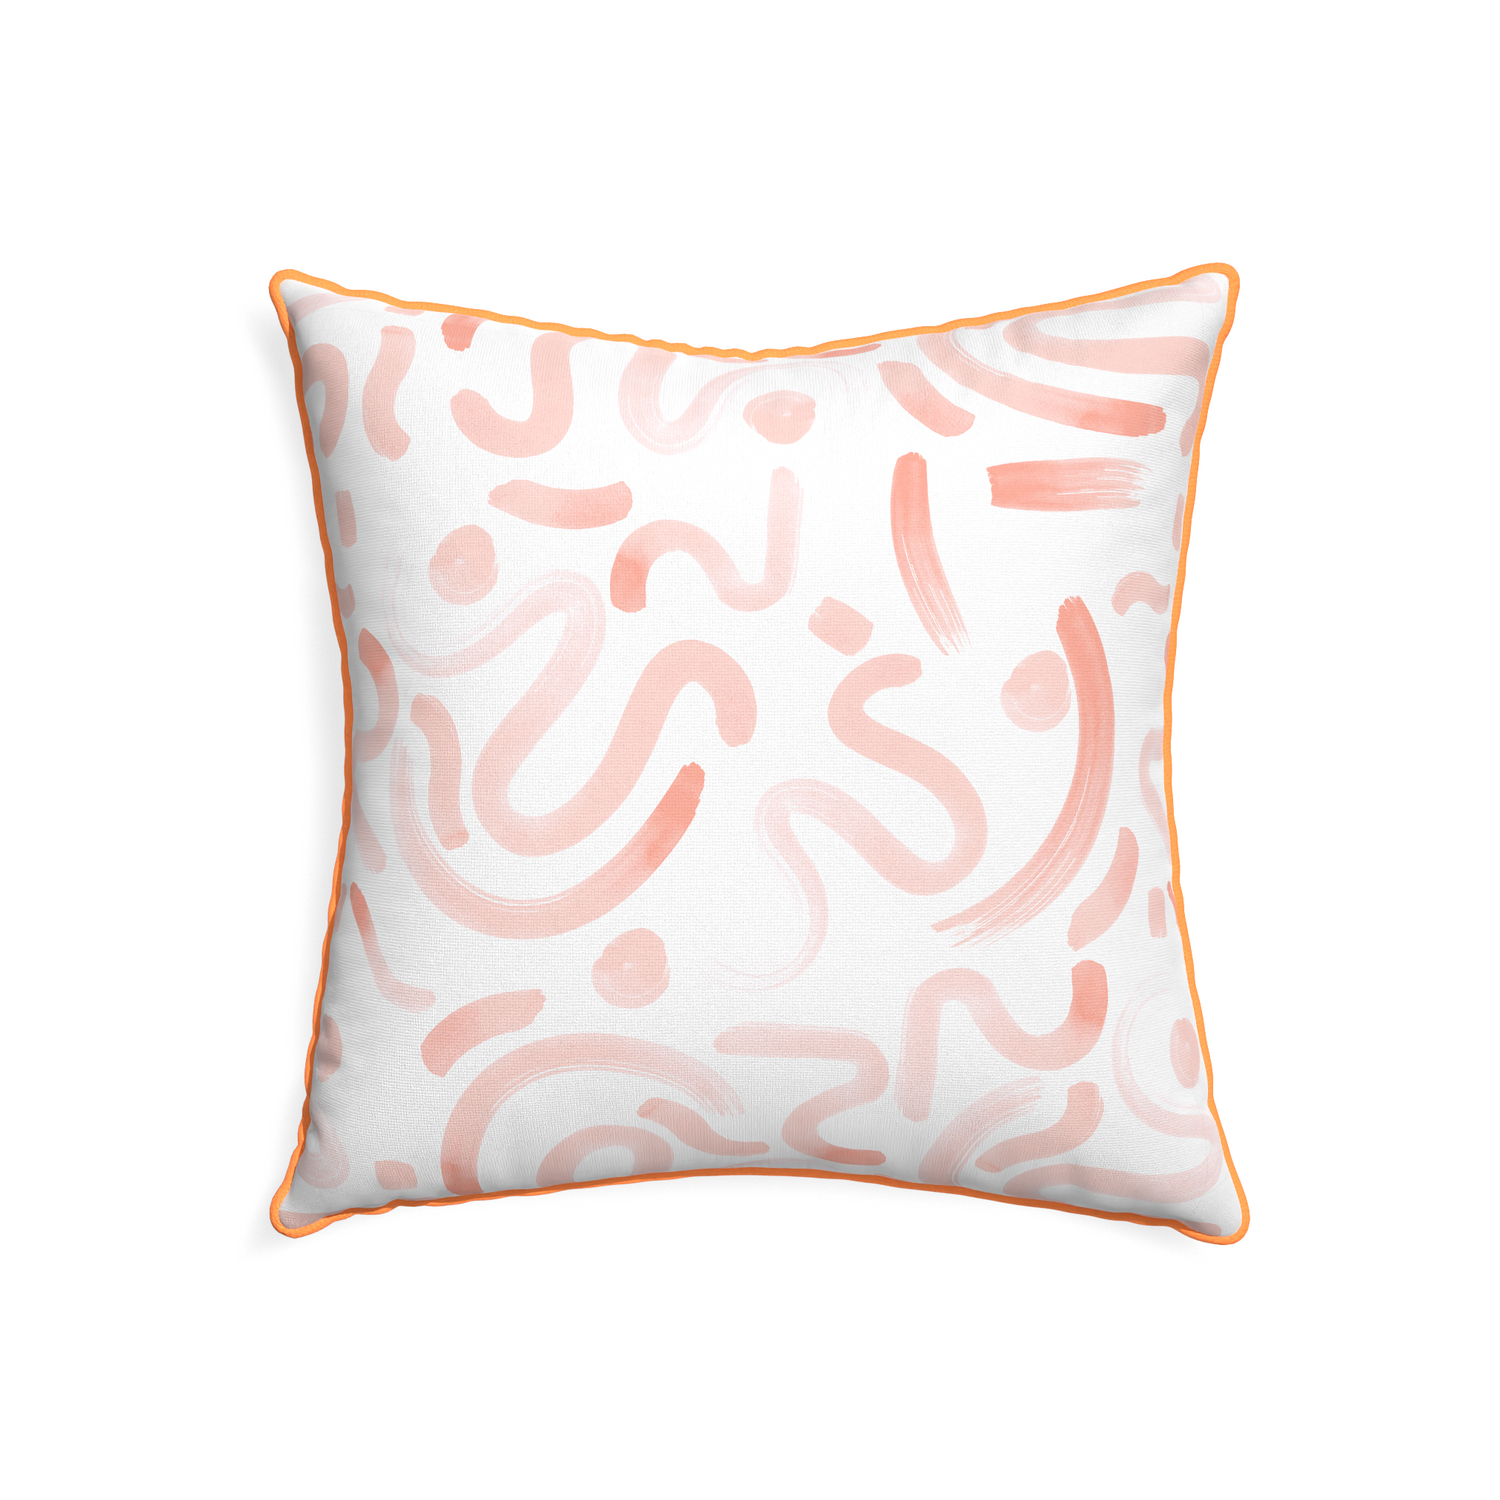 22-square hockney pink custom pink graphicpillow with clementine piping on white background